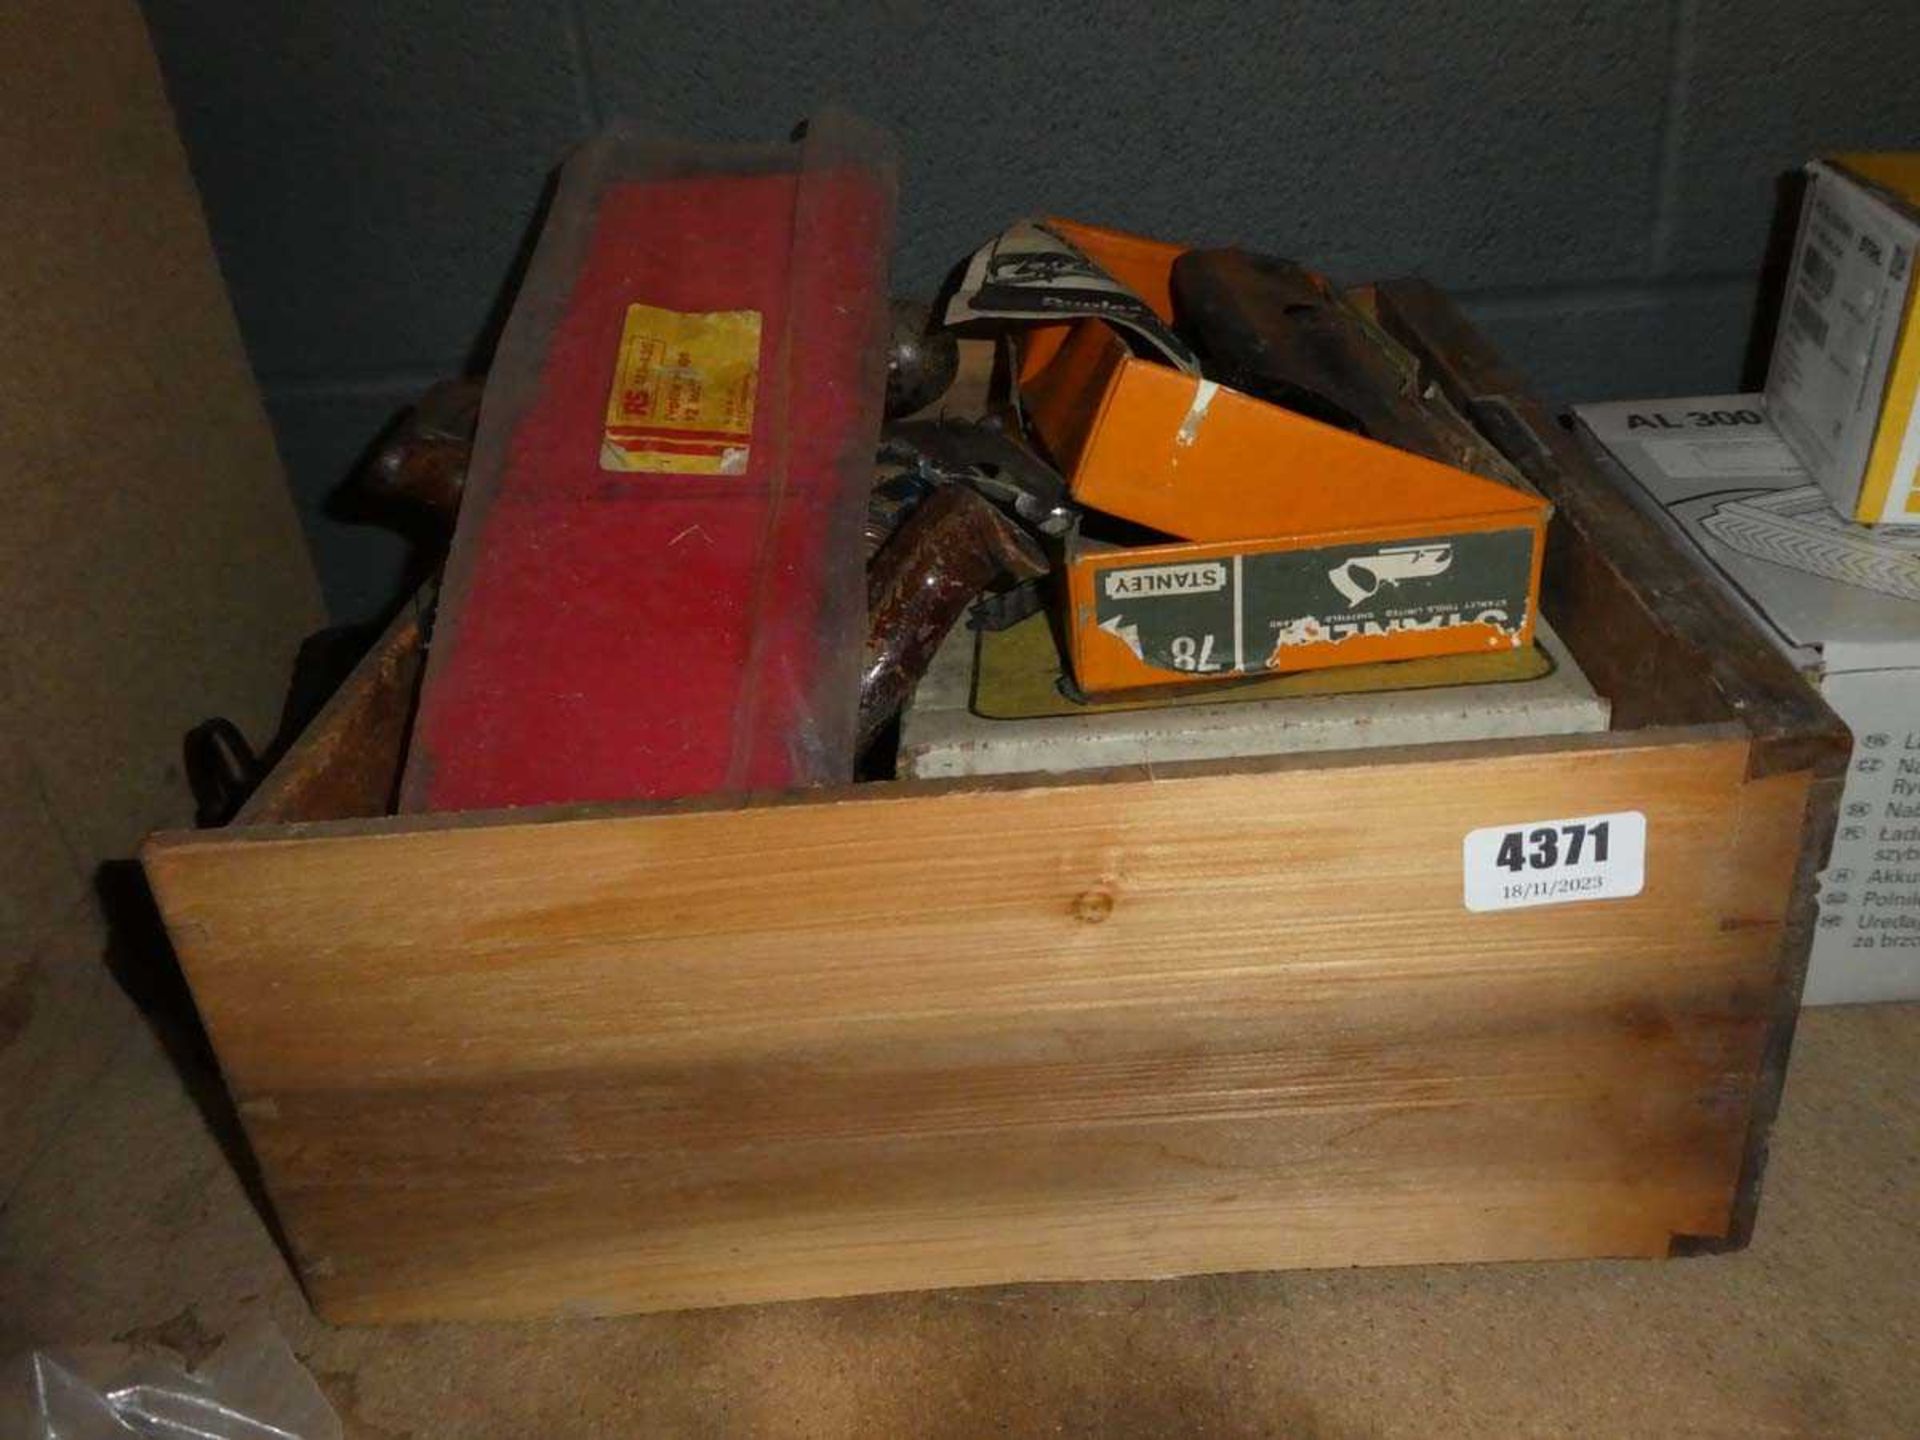 Drawer containing wood planes and various other wood working items